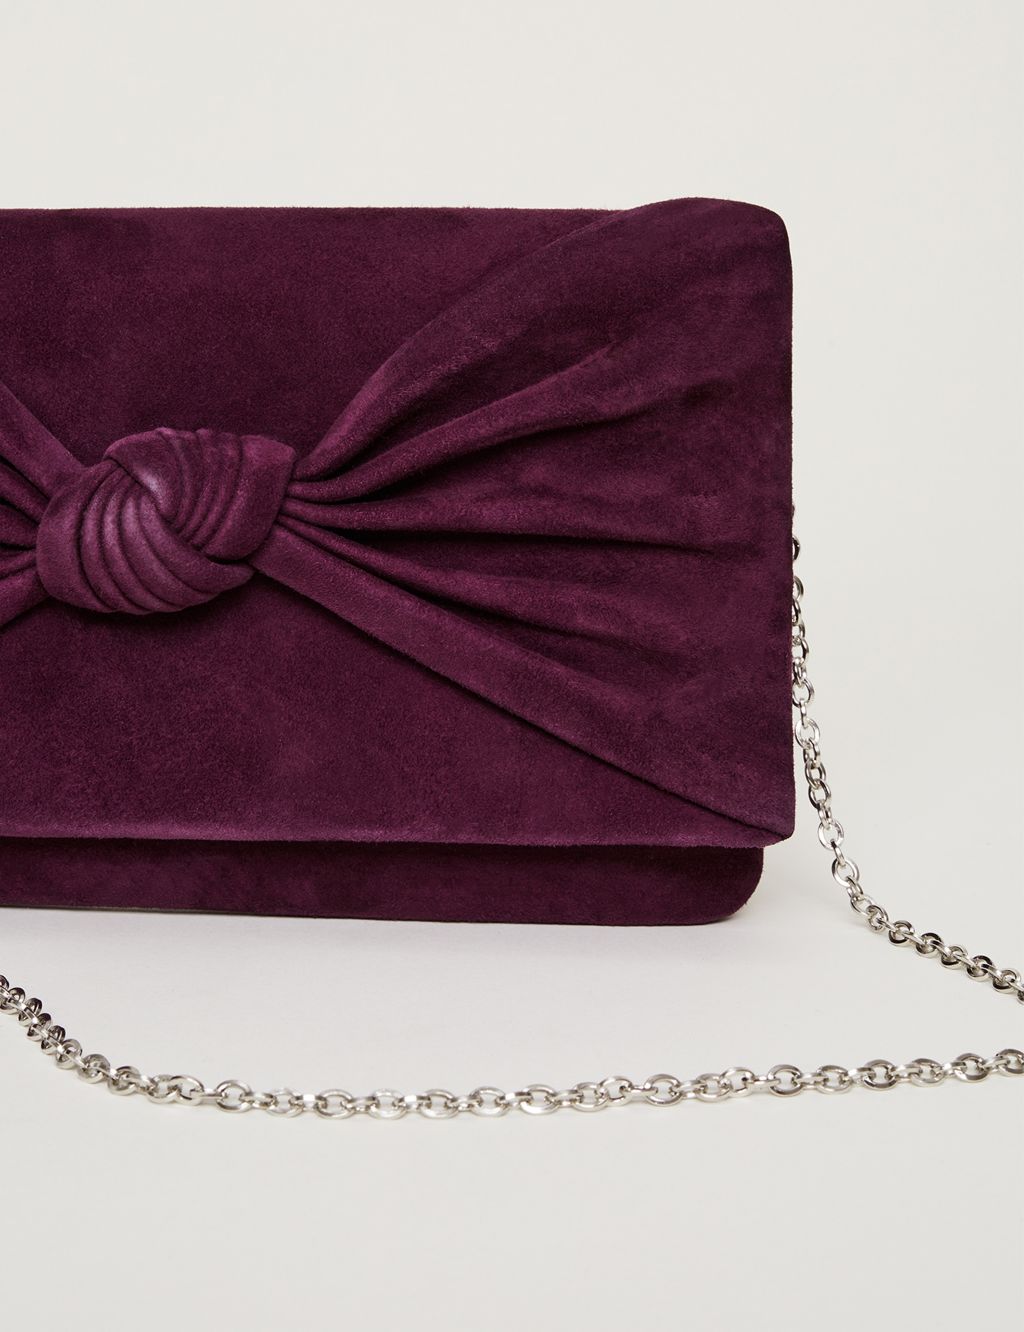 Leather Knot Front Clutch Bag image 2